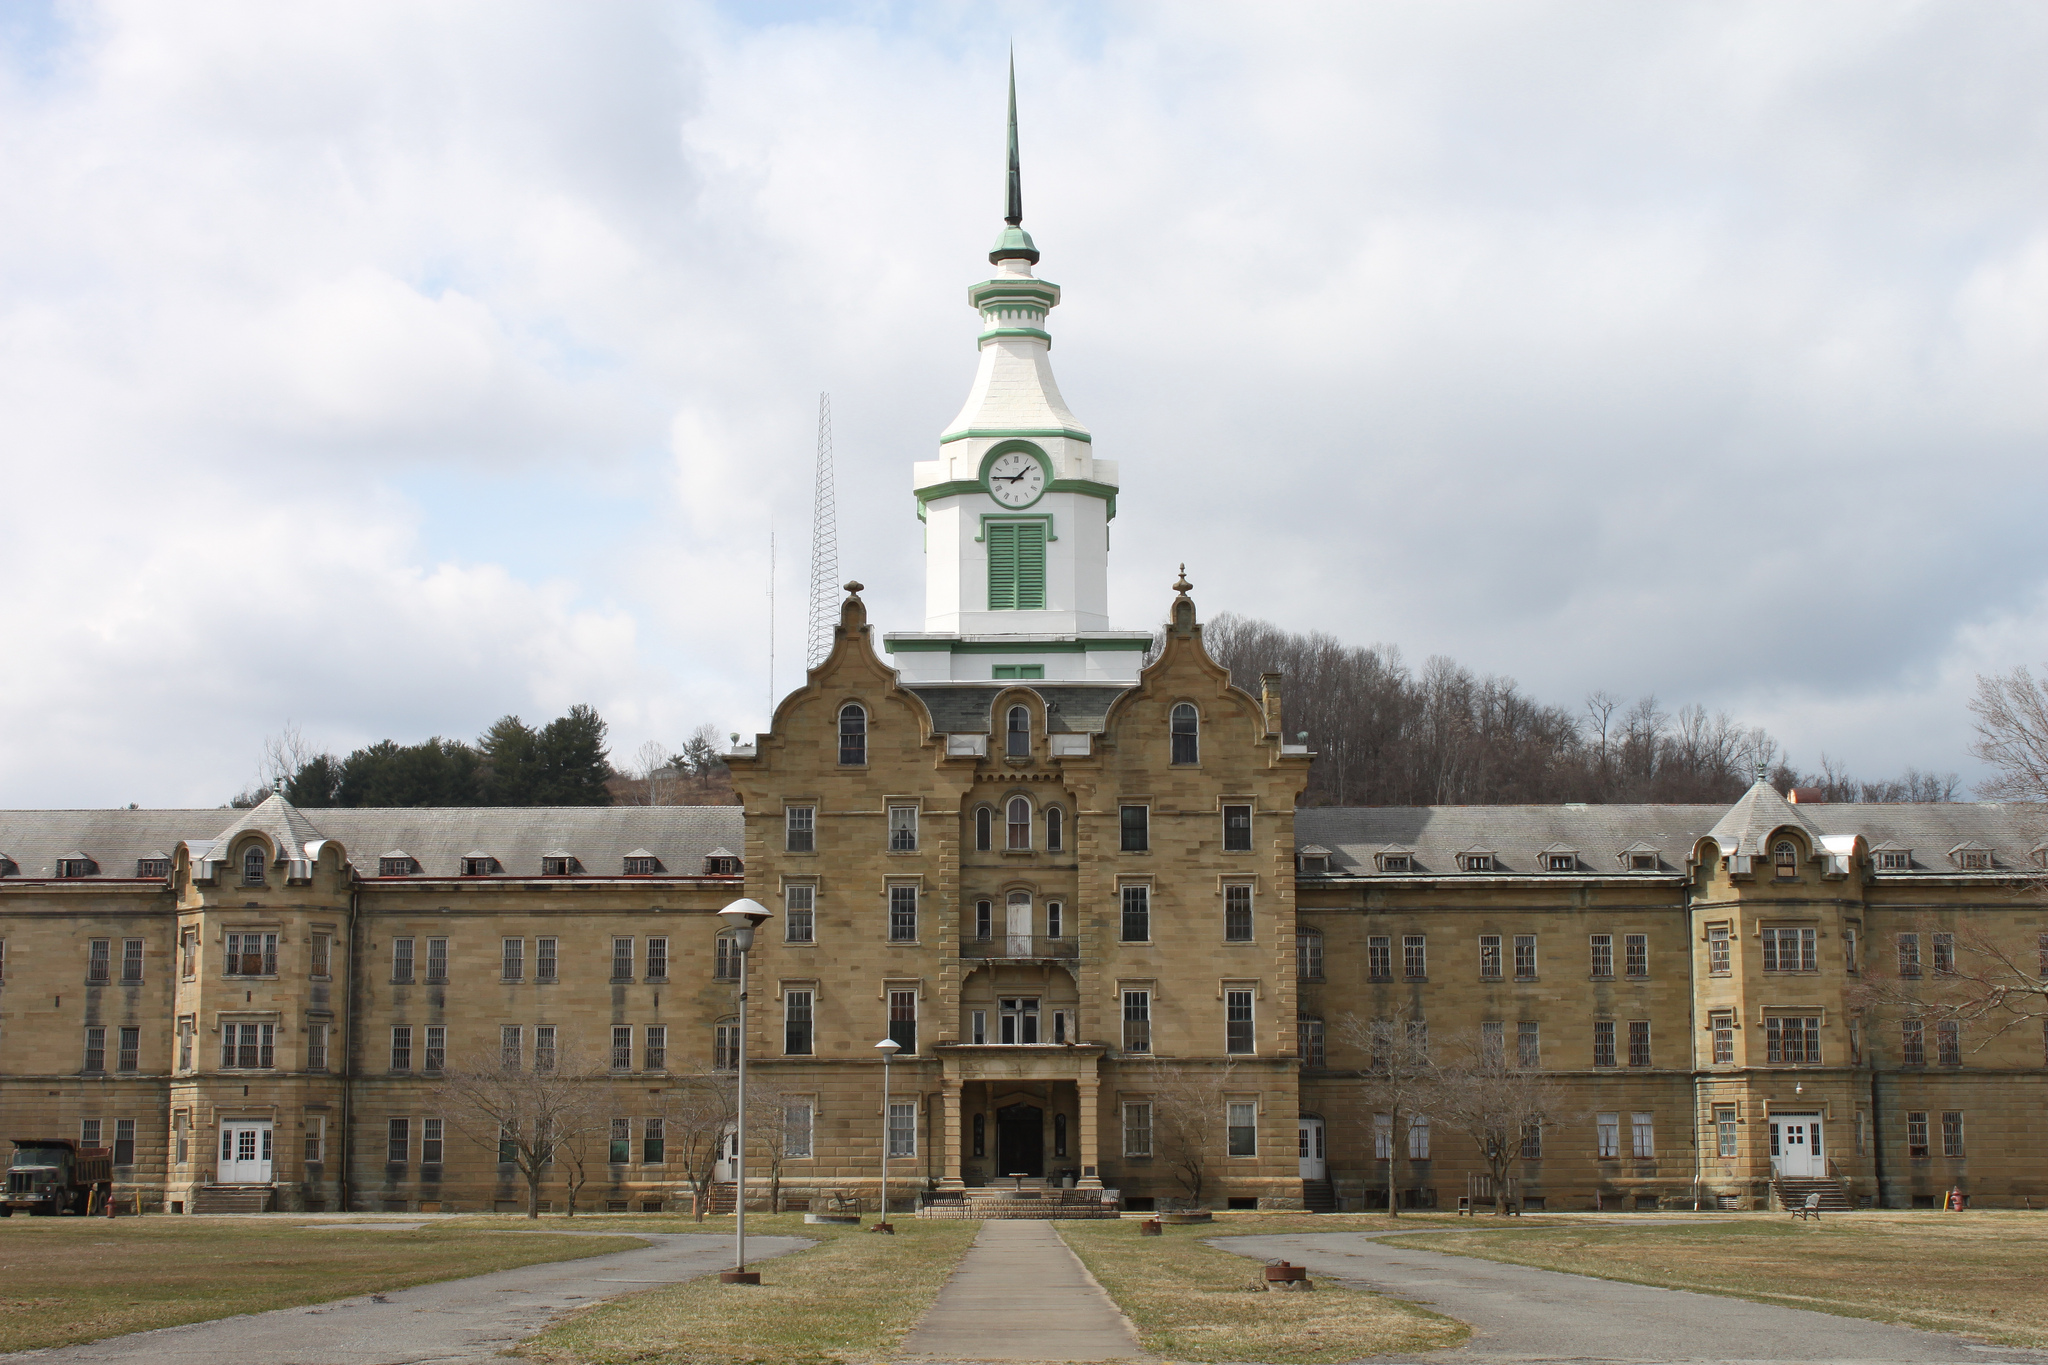 Stay Overnight In The Trans Allegheny Lunatic Asylum For A Creepy Ghost Hunt